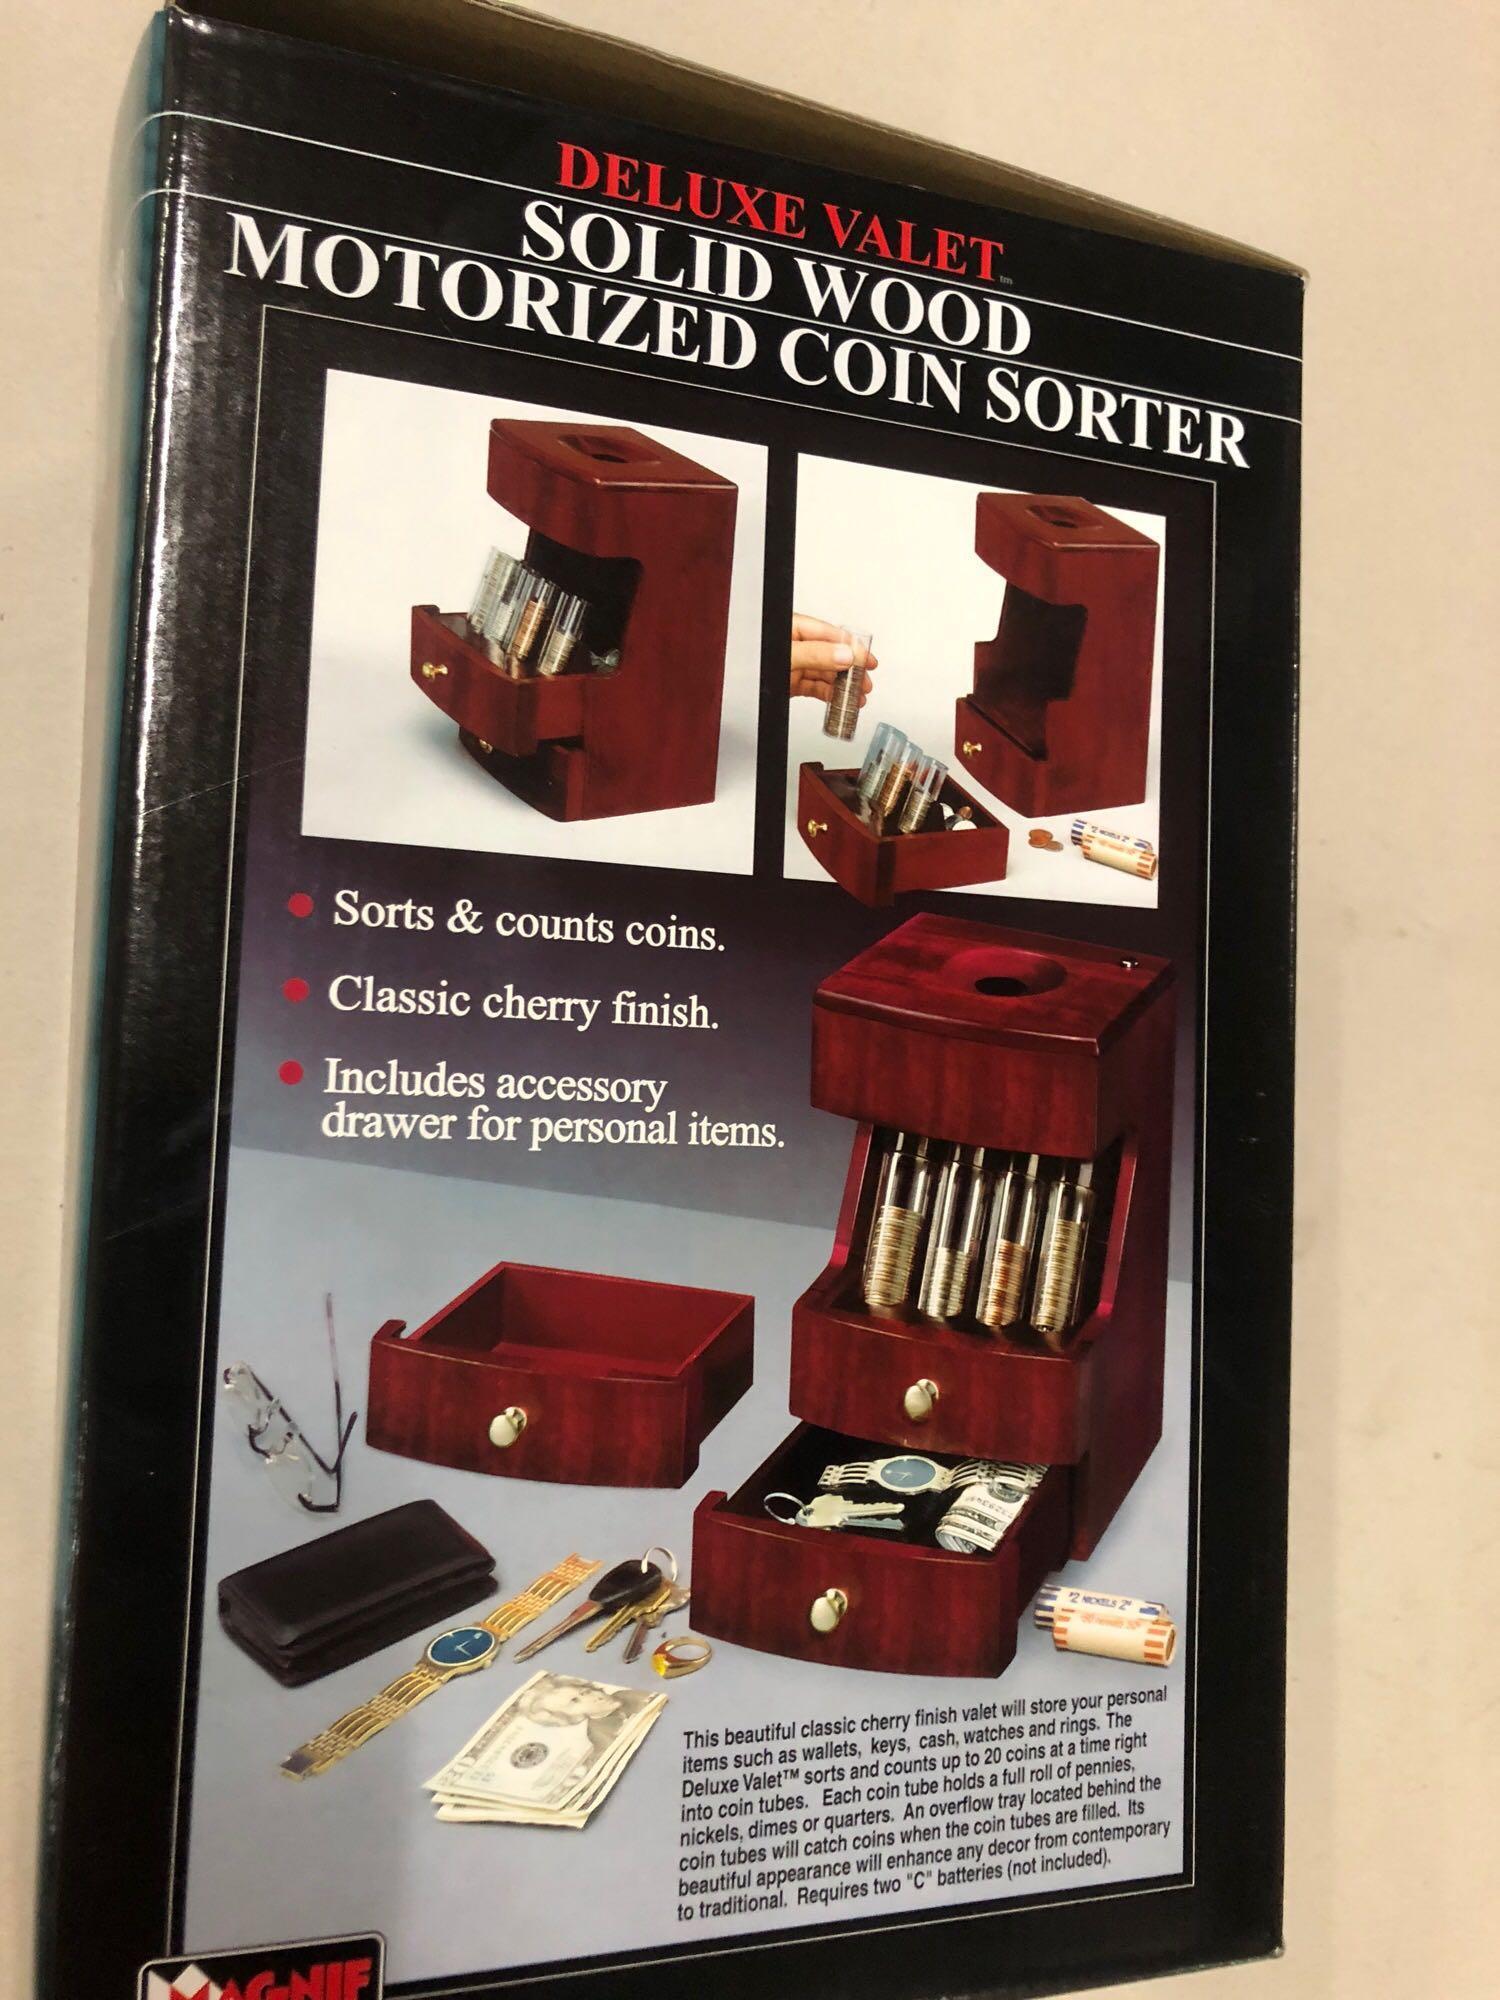 Solid Wood Deluxe Valet Motorized Coin Sorter (Sorts & Counts, Classic Cherry Finish, Accessory